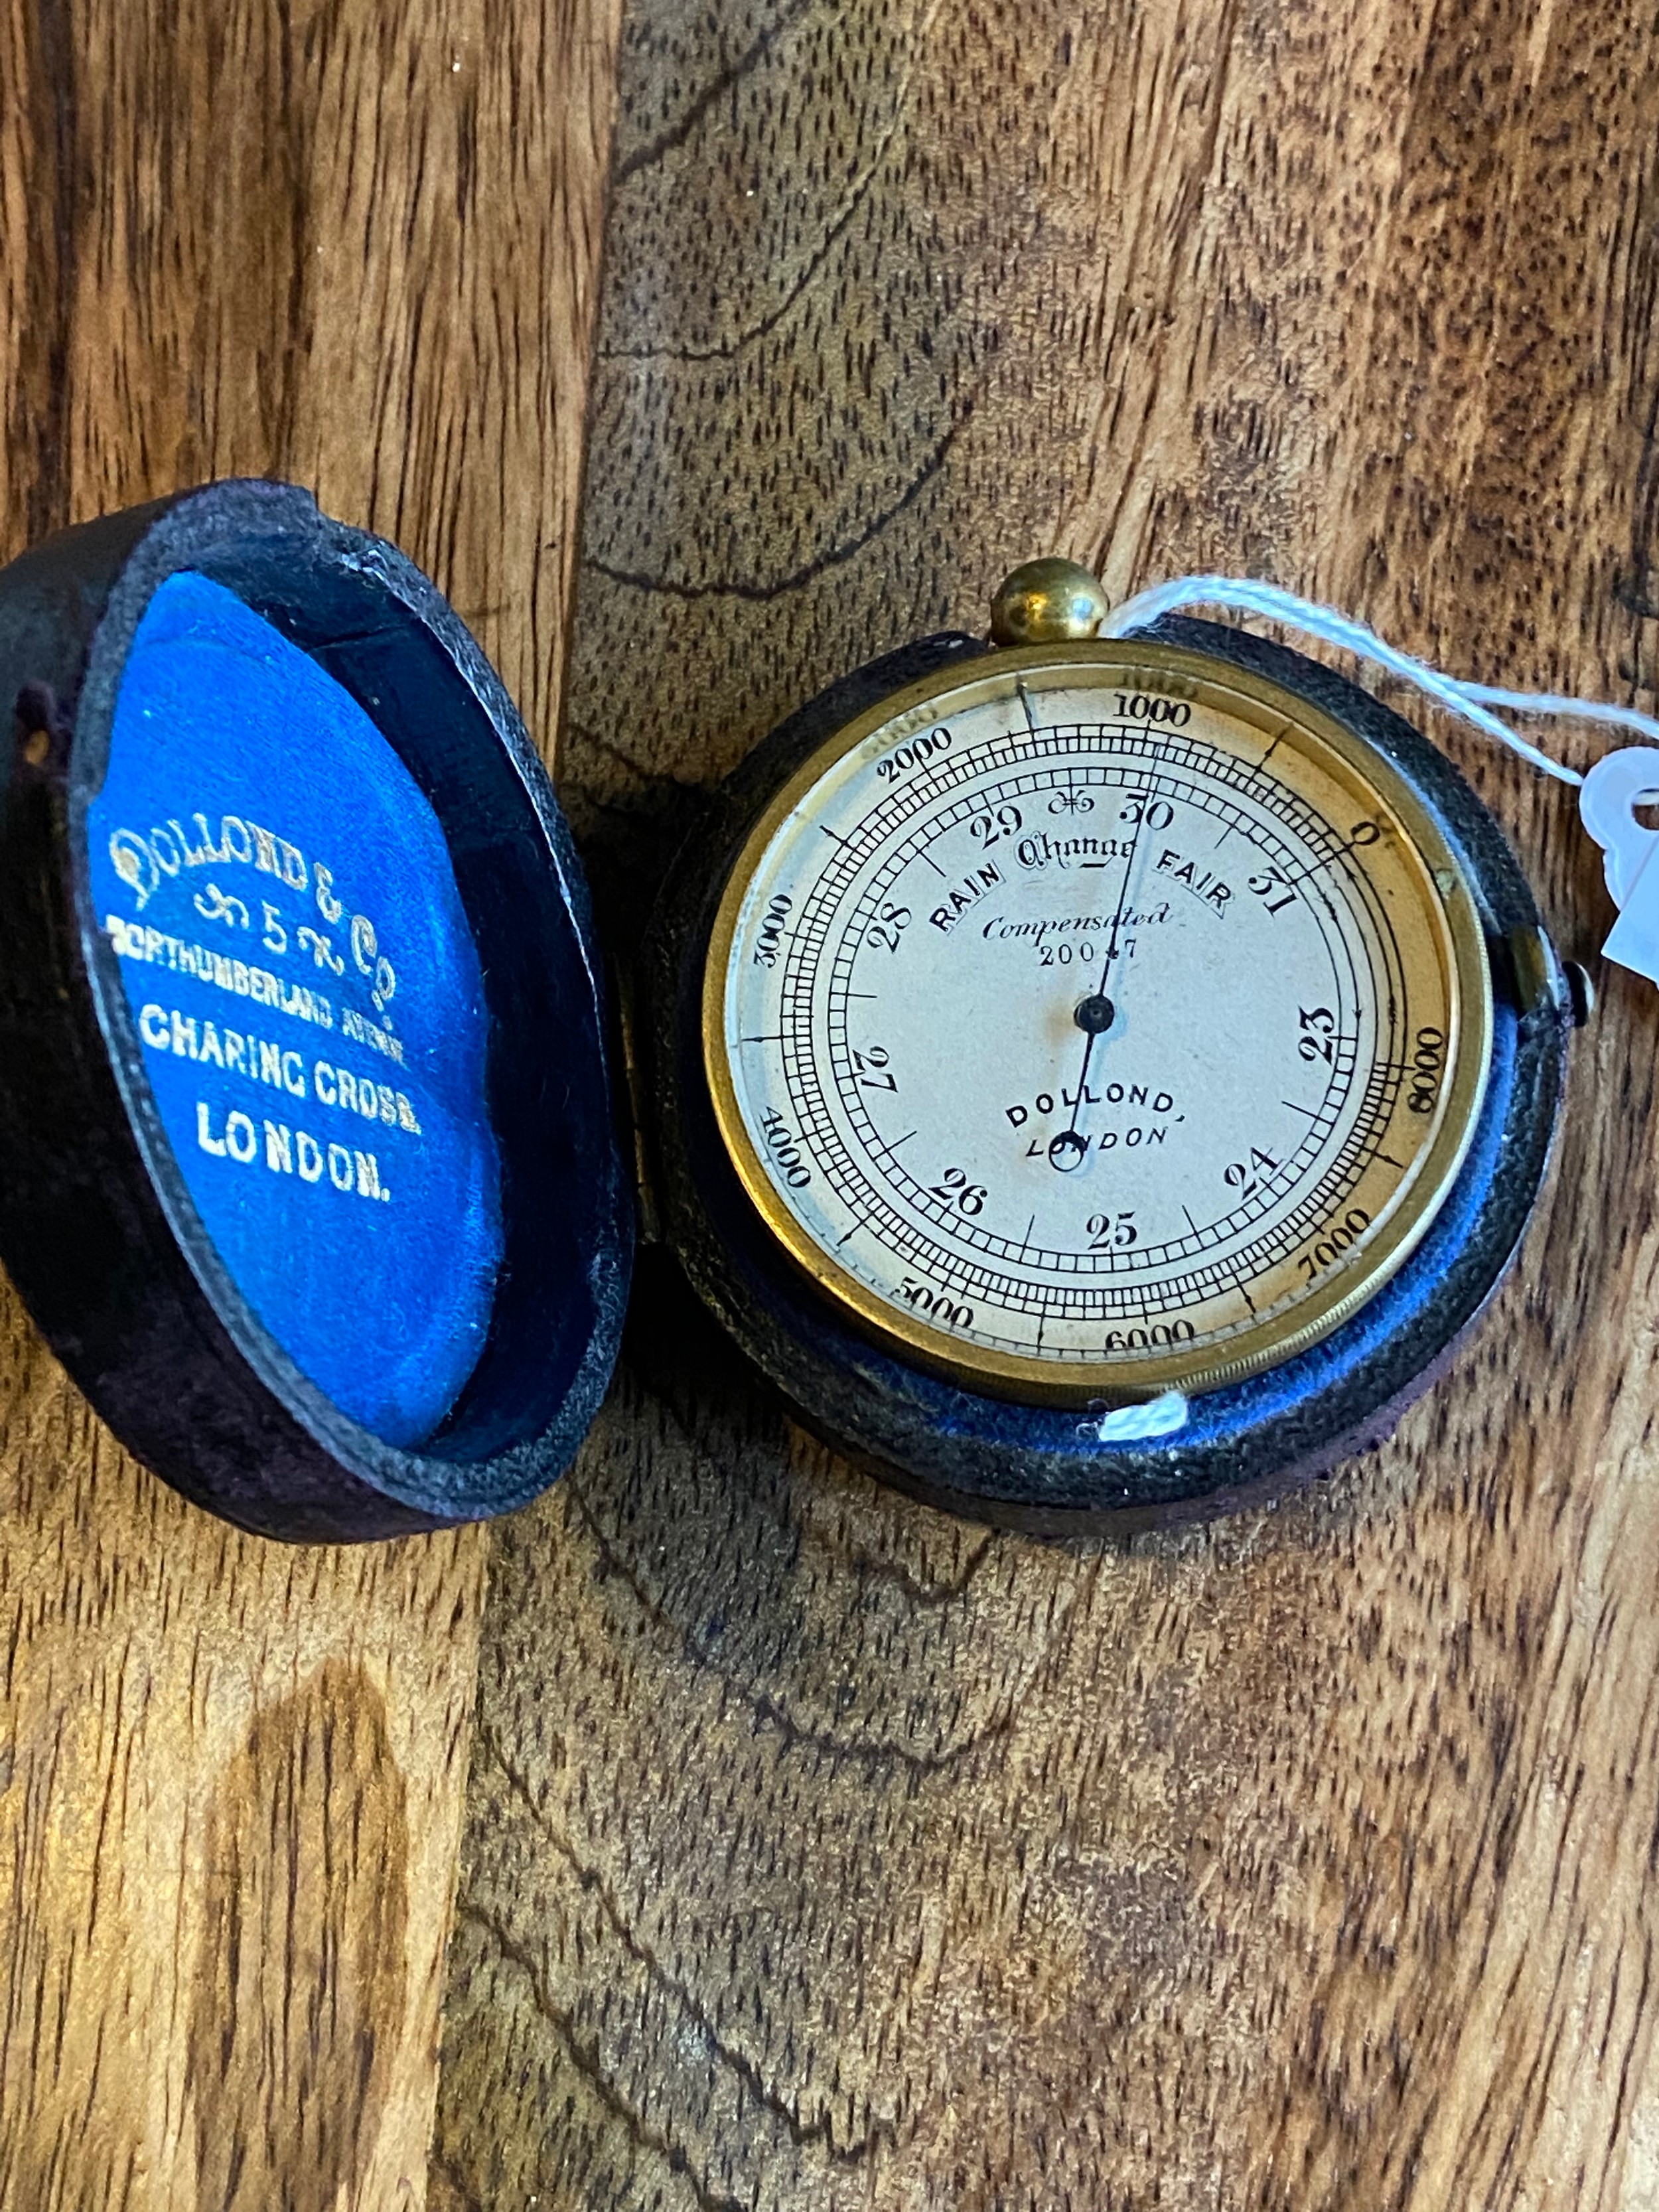 A 19th century pocket Barometer by Dollond London. Comes with protective leather case.